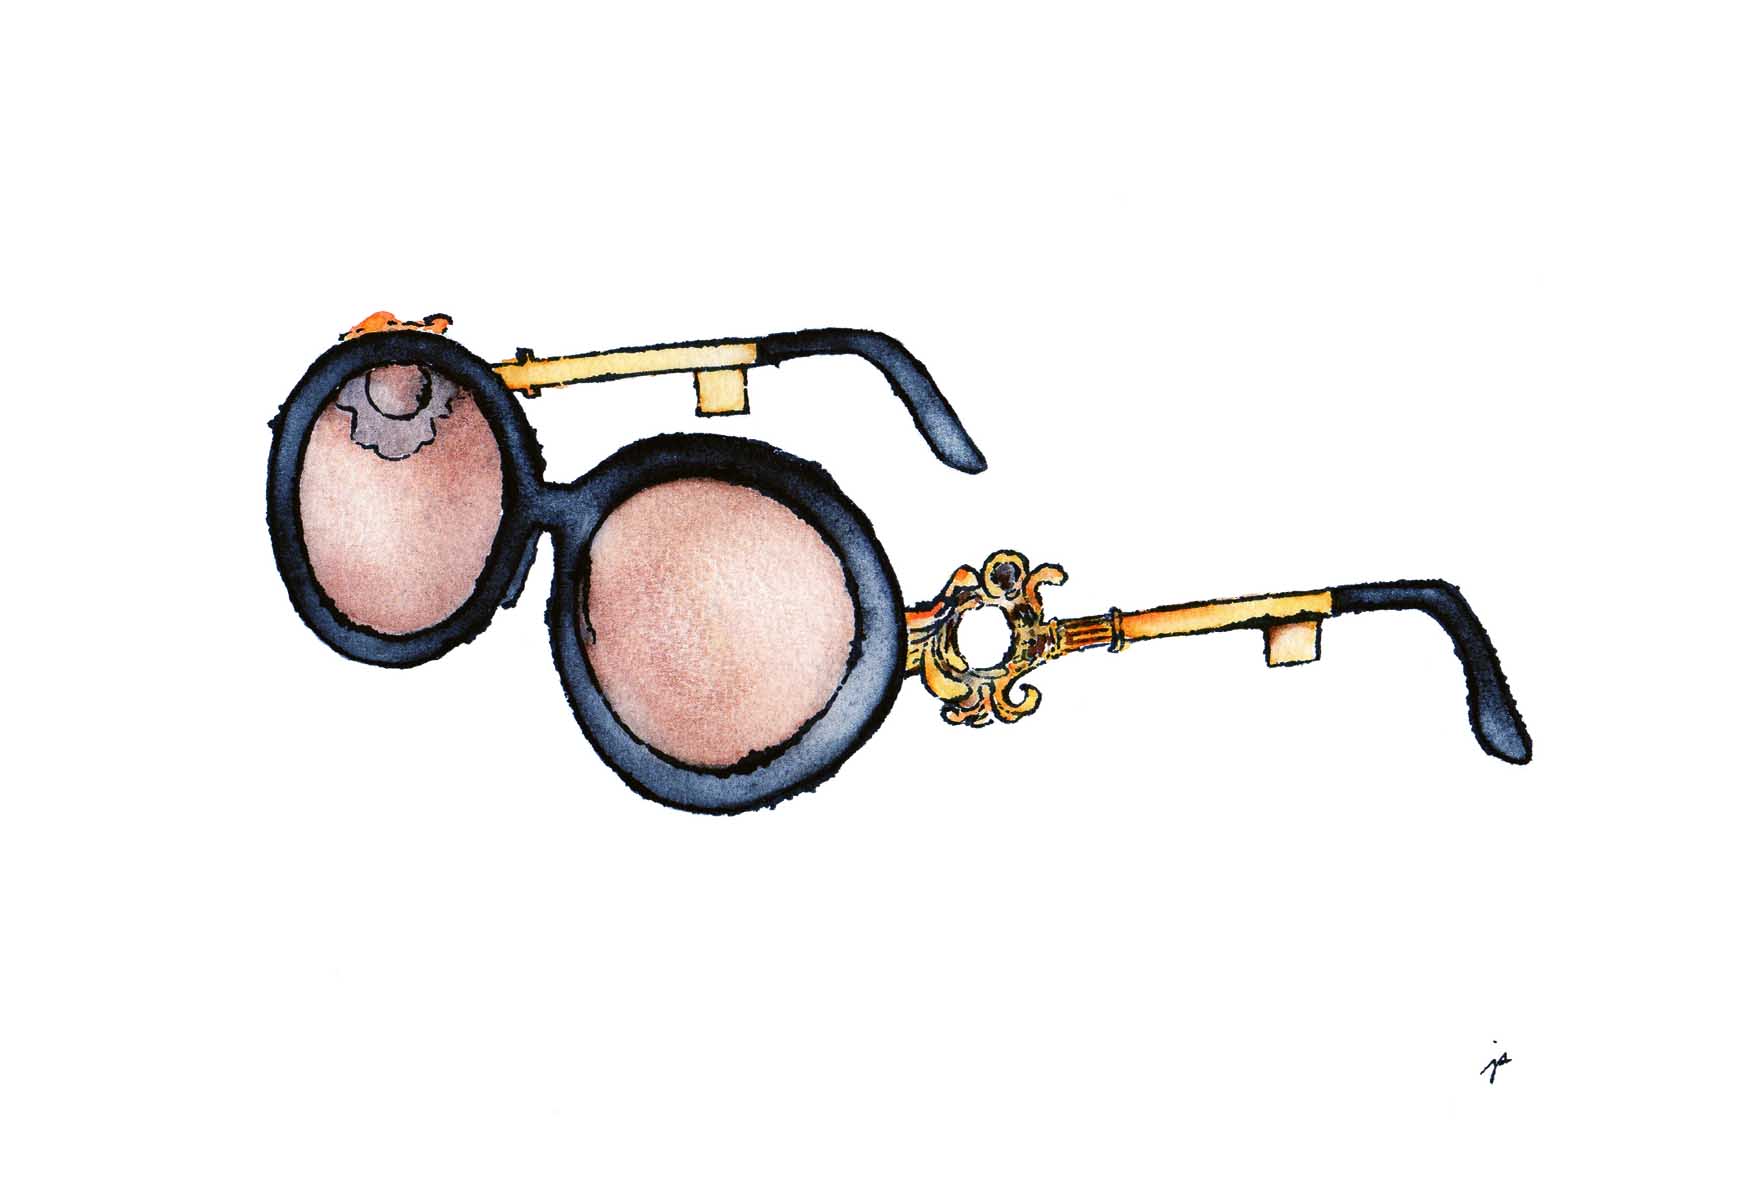 moschino by persol